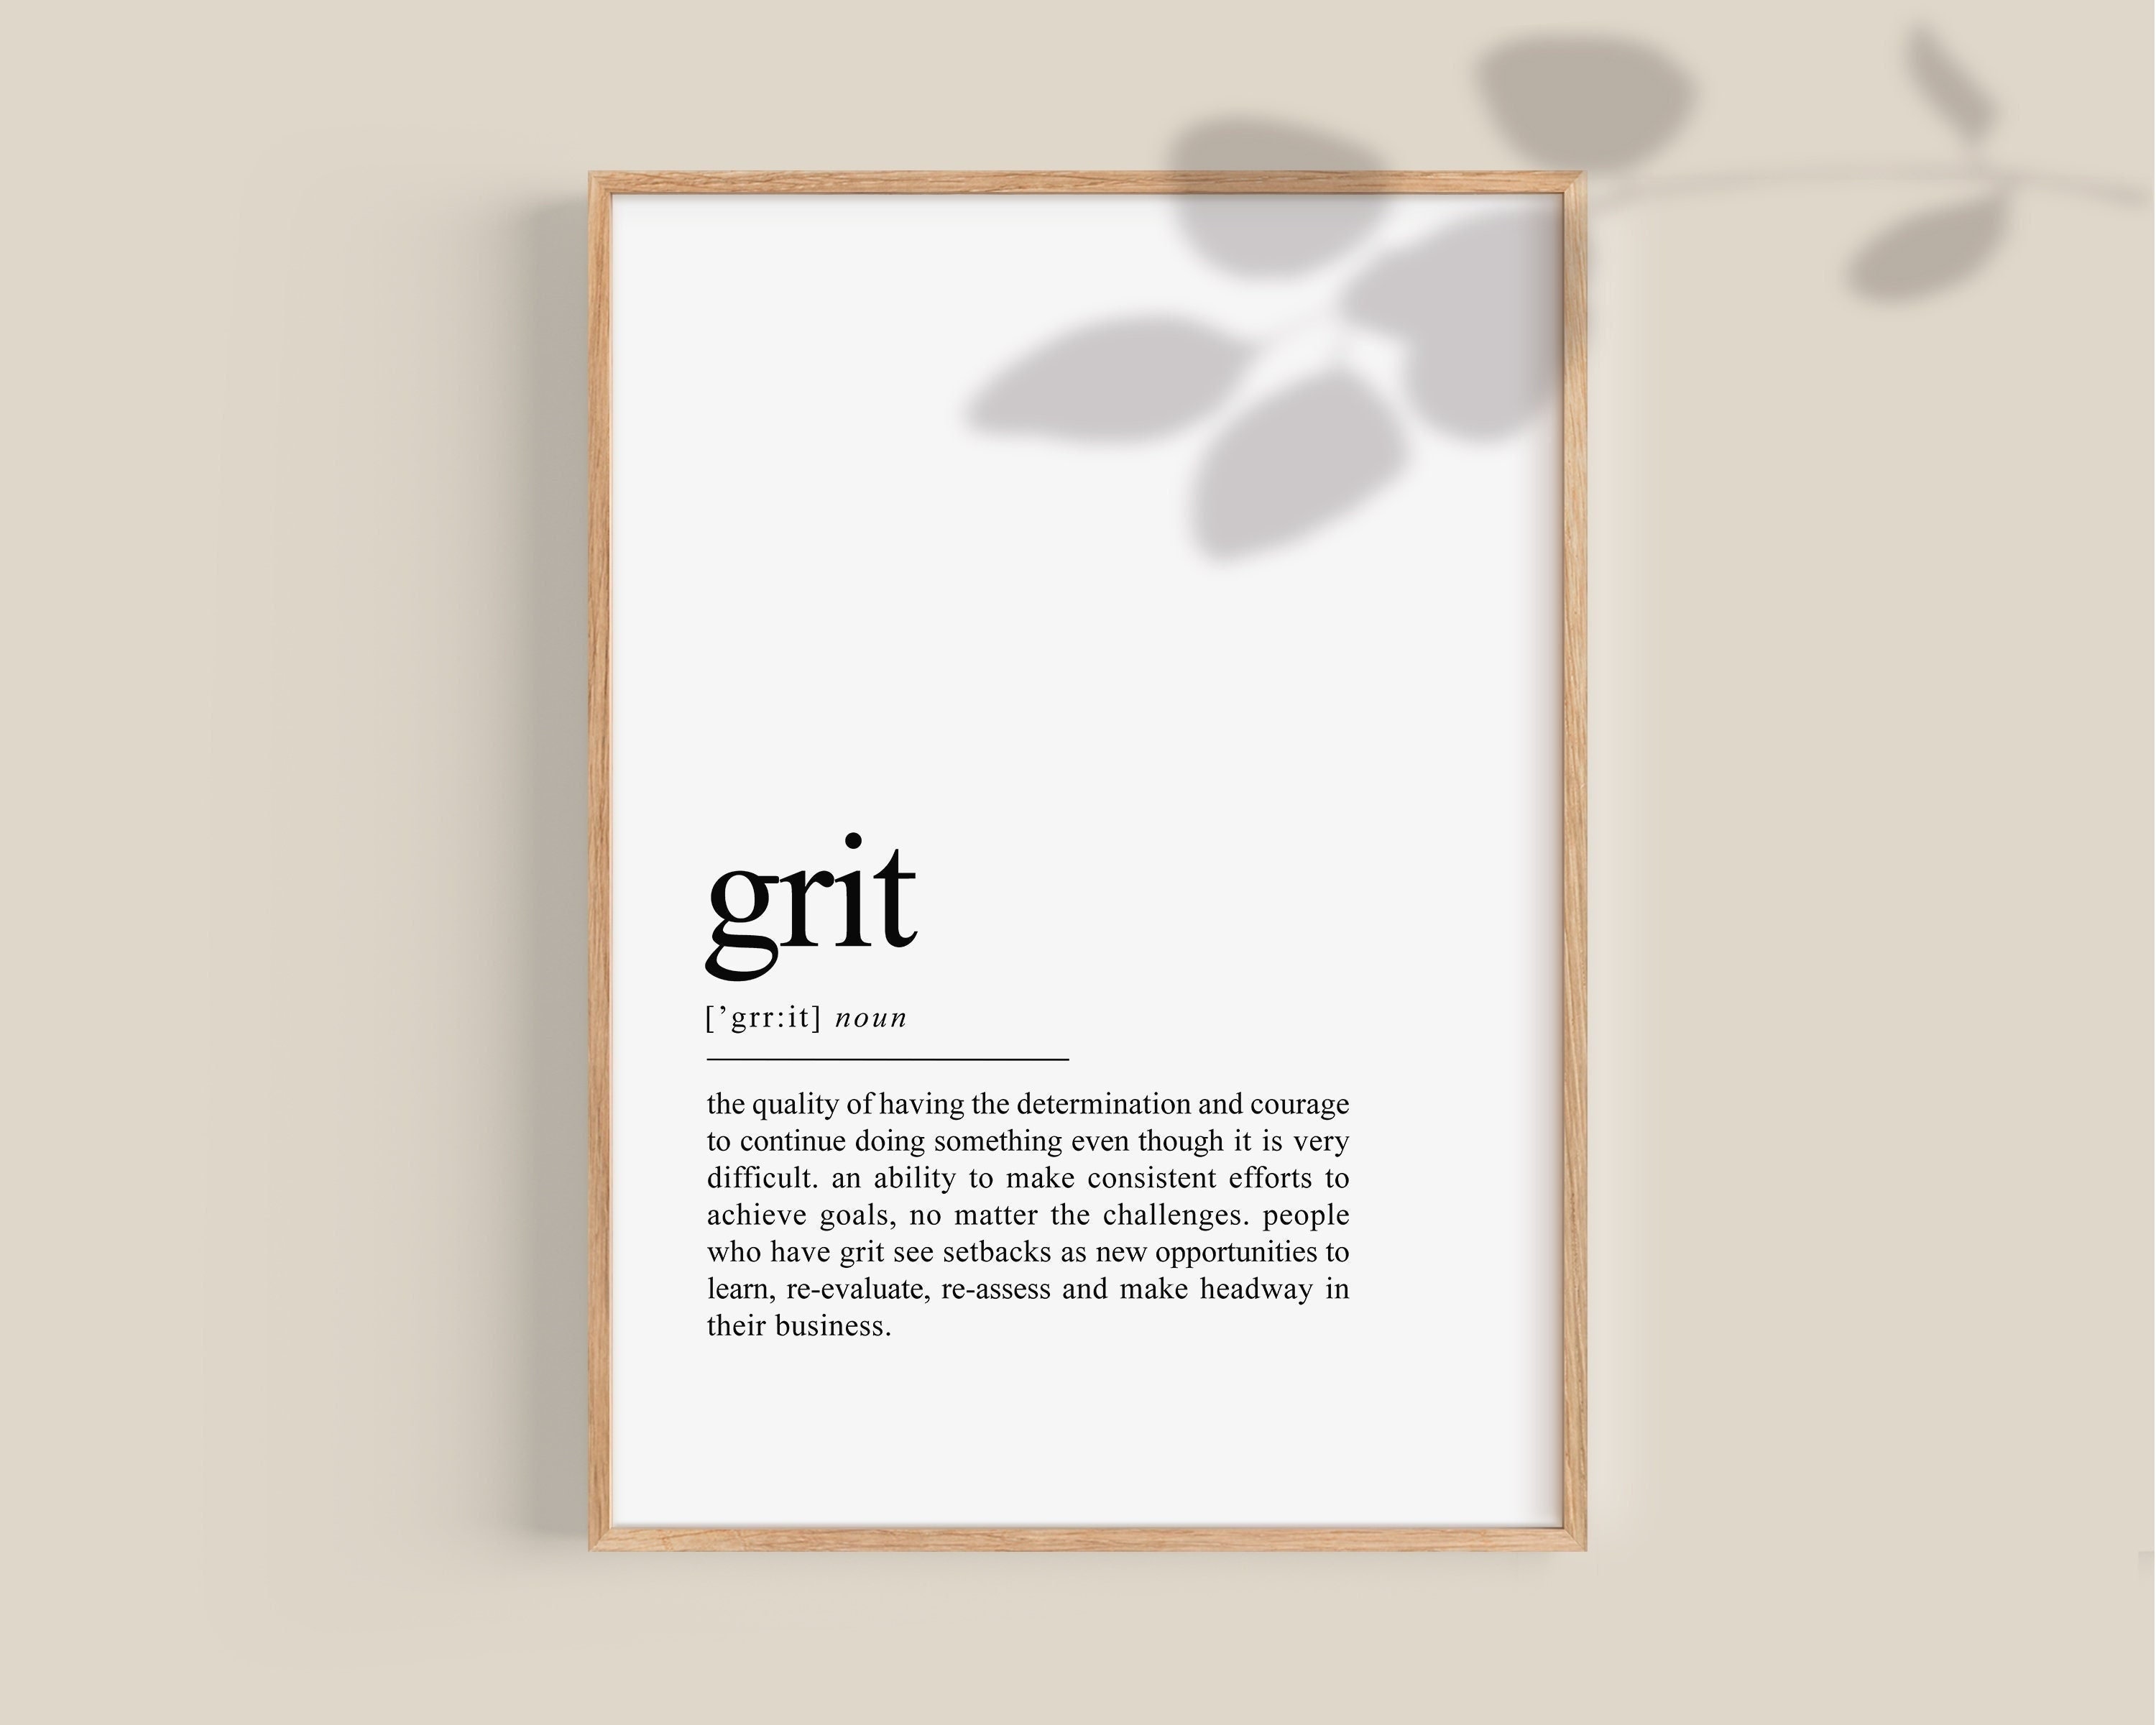 Grit and Grace Cuff Bracelet - Entrepreneur Jewelry - Gifts for Her